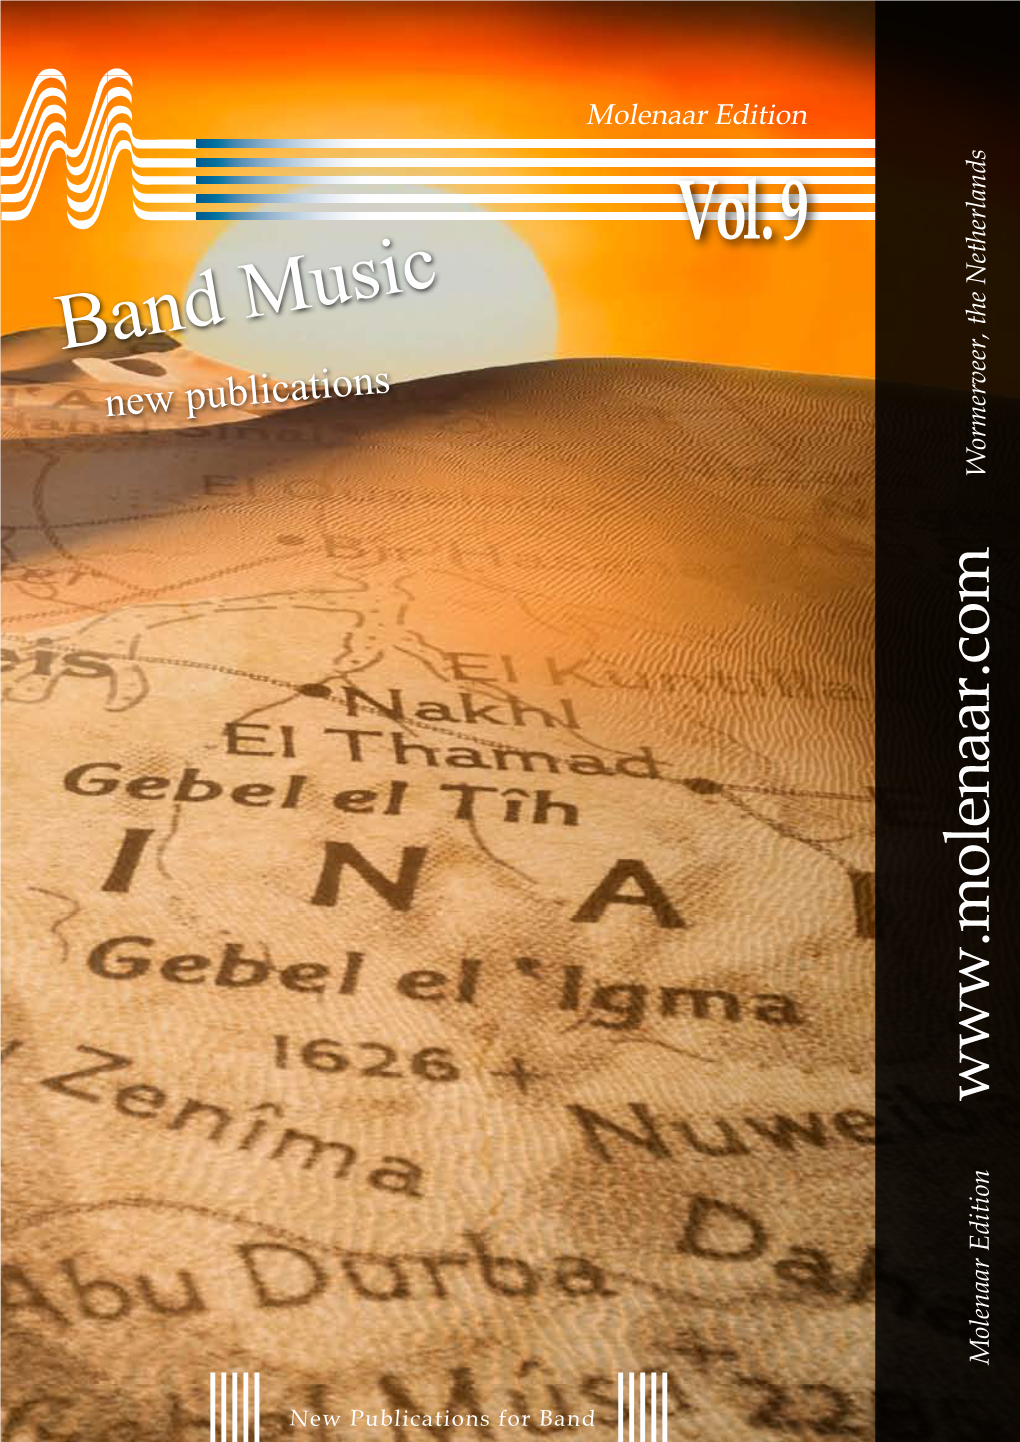 Vol. 9 Band Music New Publications Wormerveer, the Netherlands